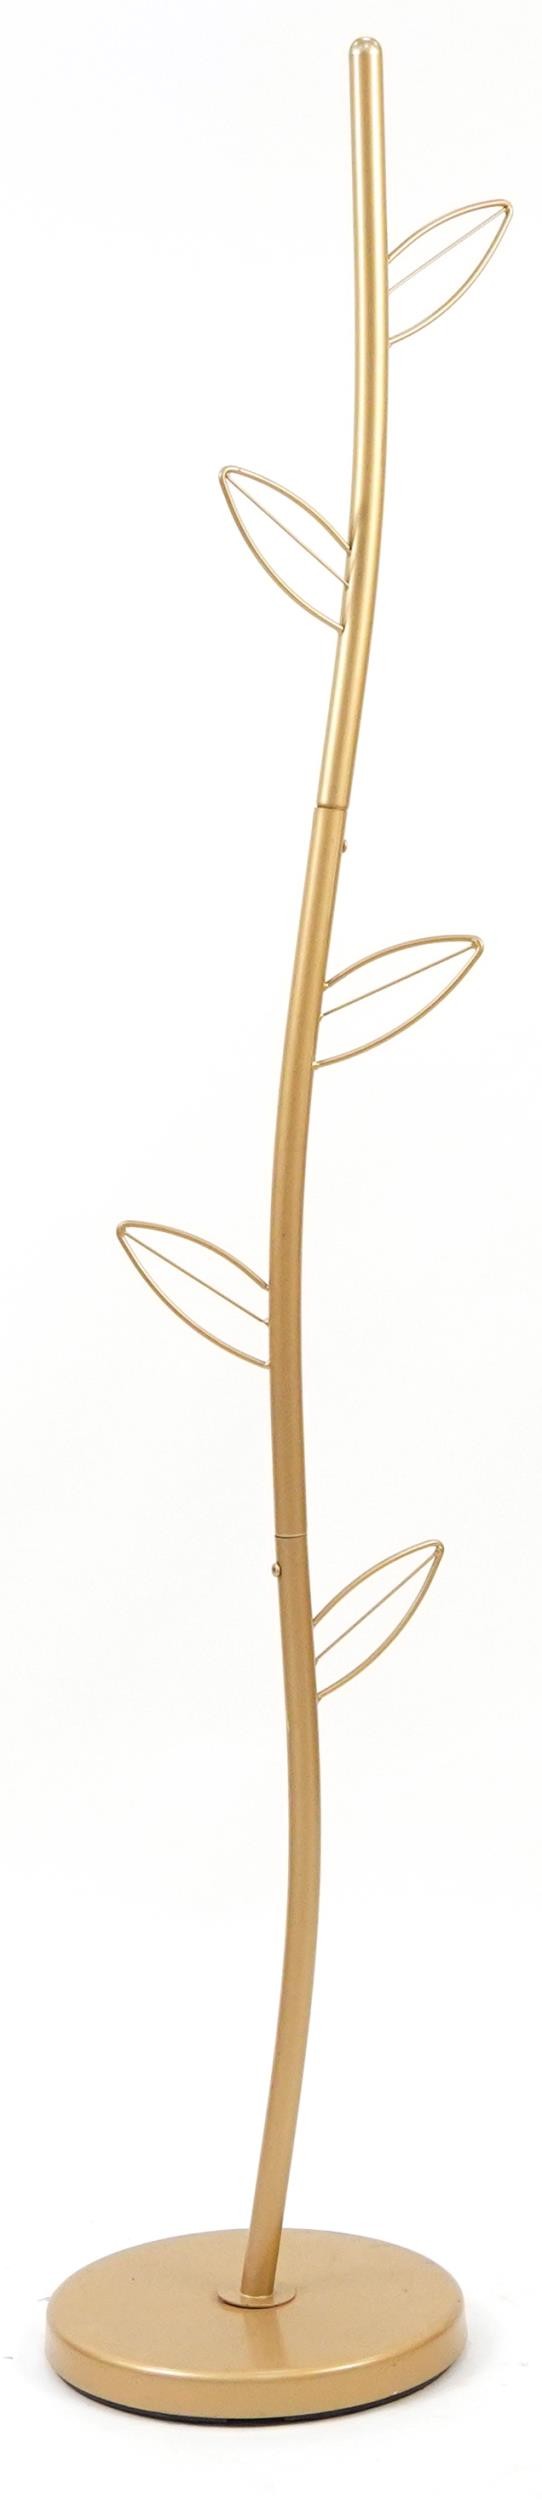 Gilt metal naturalistic hat and coat stand, 175cm high